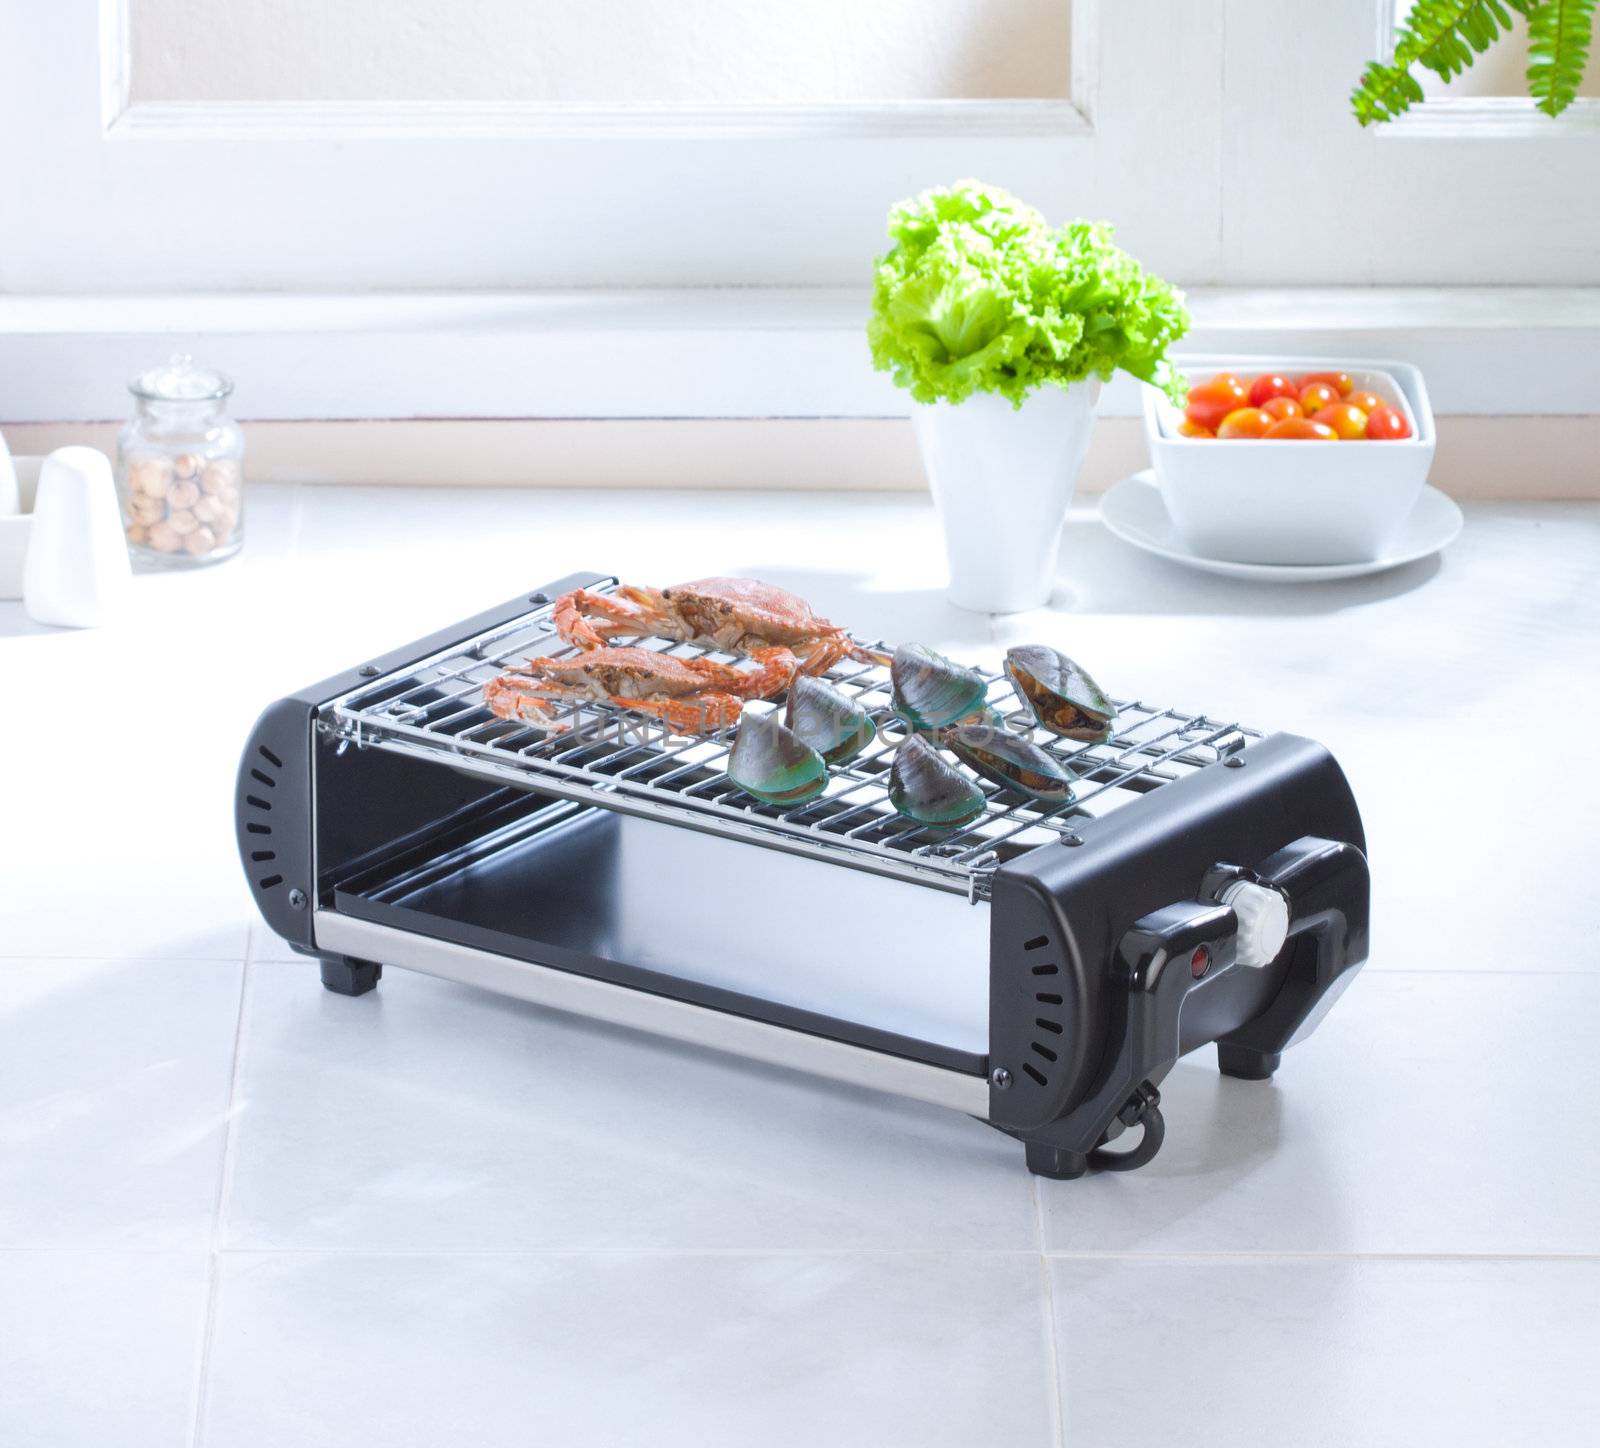 The smokeless grill stove the alternative choice for your kitchen